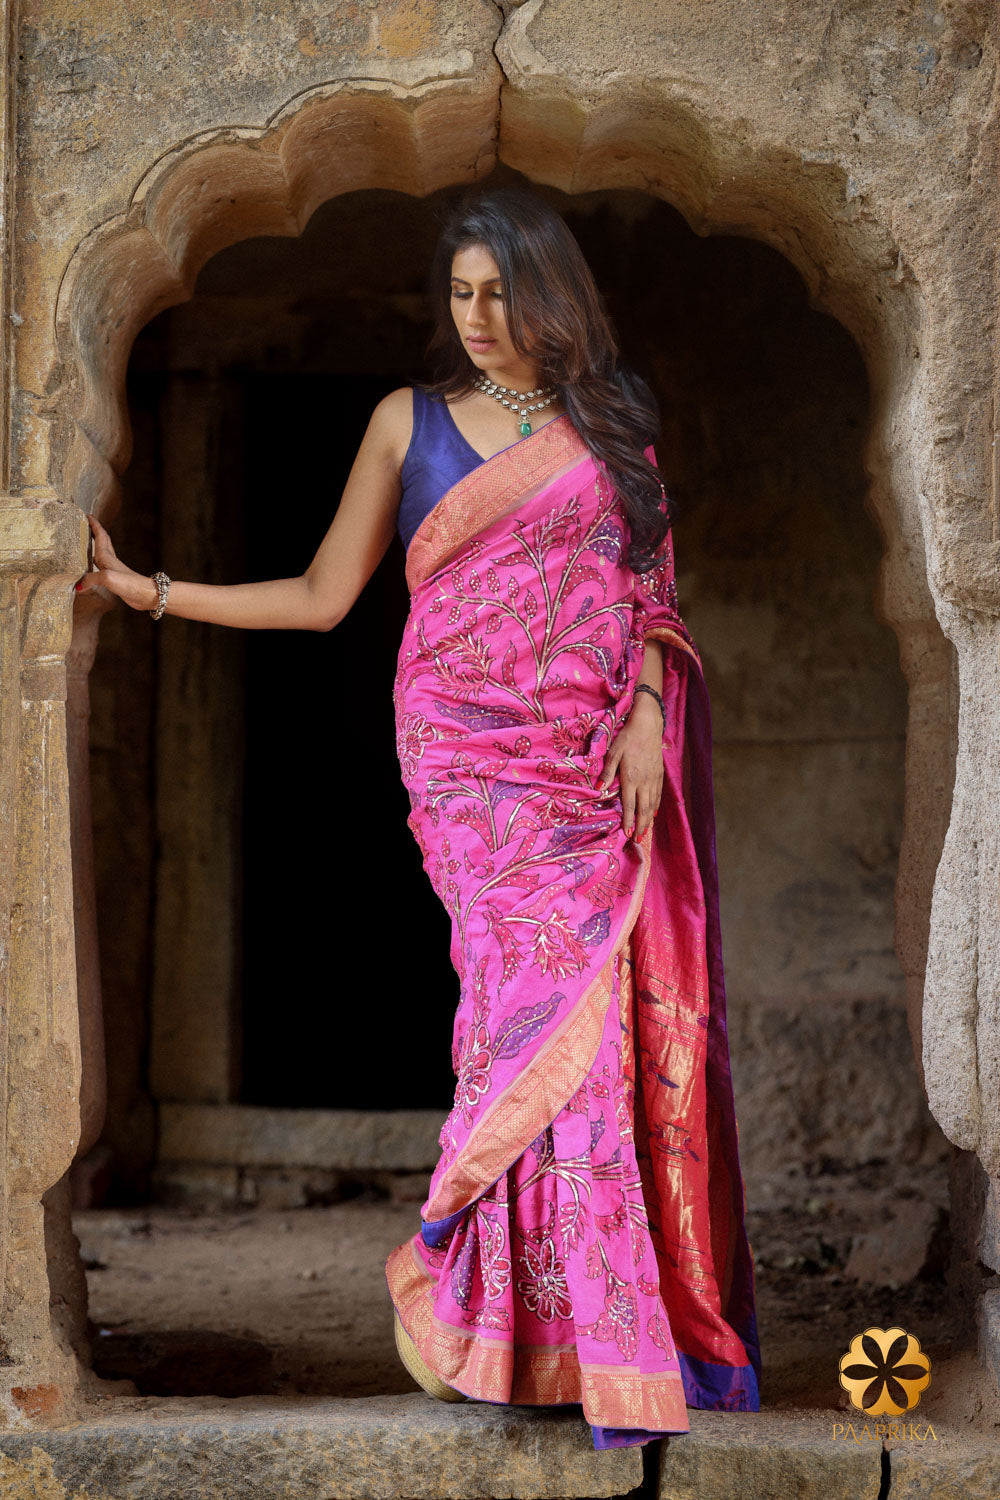 Hot Pink Paithani Silk Saree with Kalamkari and Sequin Embroidery paired with complementary accessories. The saree's vibrant pink hue, artistic intricacy, and shimmering sequins create a captivating ensemble, perfectly complemented by the accessories for a complete and stylish appearance.